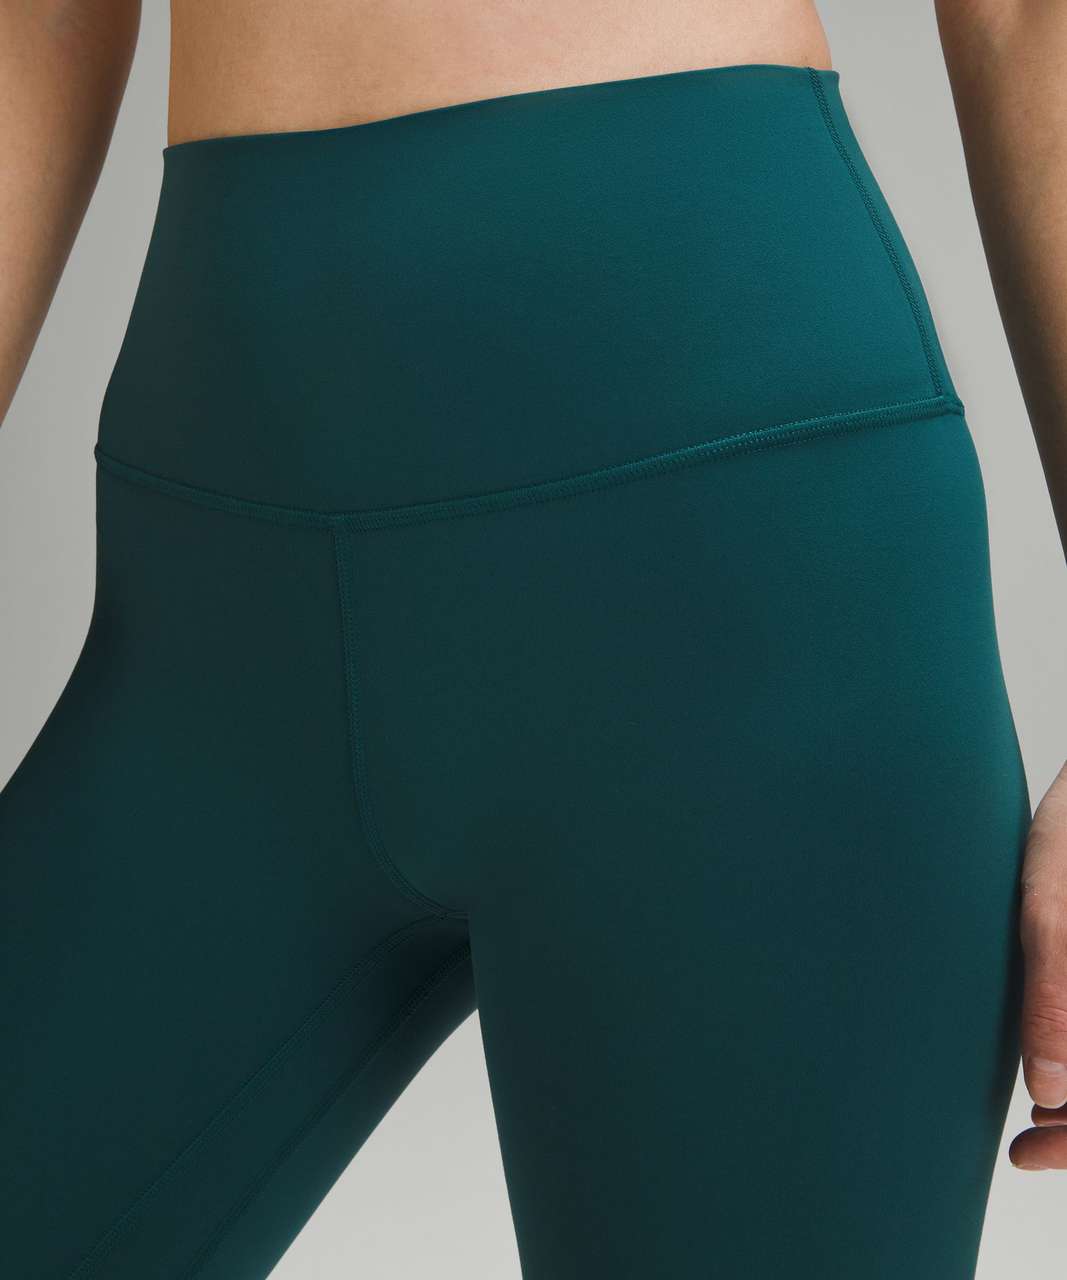 ALIGN 28” HIGH RISE PANT- STORM TEAL